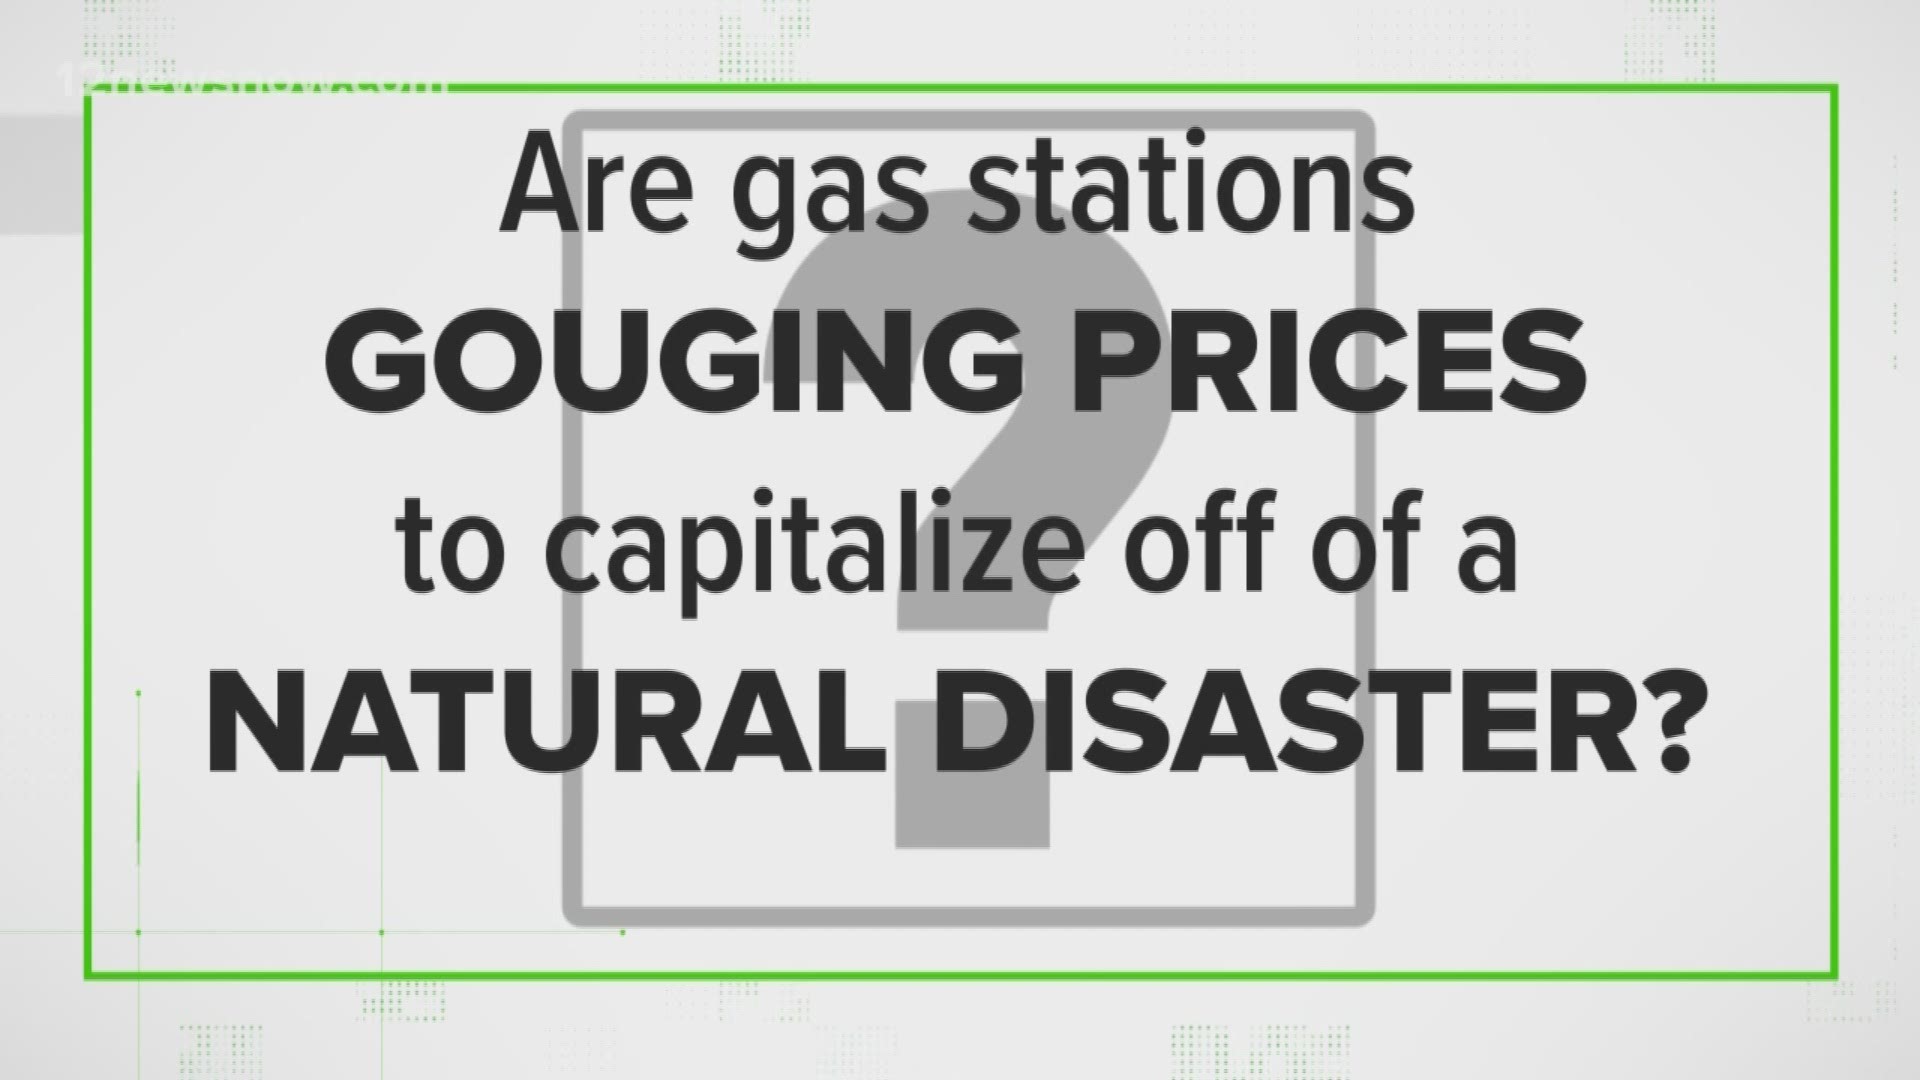 Gas prices are surging ahead of Tropical Storm Harvey. Some pumps in Southeast Texas have seen a 30 cent increase over the last several hours. We've seen lots of posts on social media accusing gas stations of price gouging. Are gas stations gouging prices to capitalize off of you during a natural disaster?